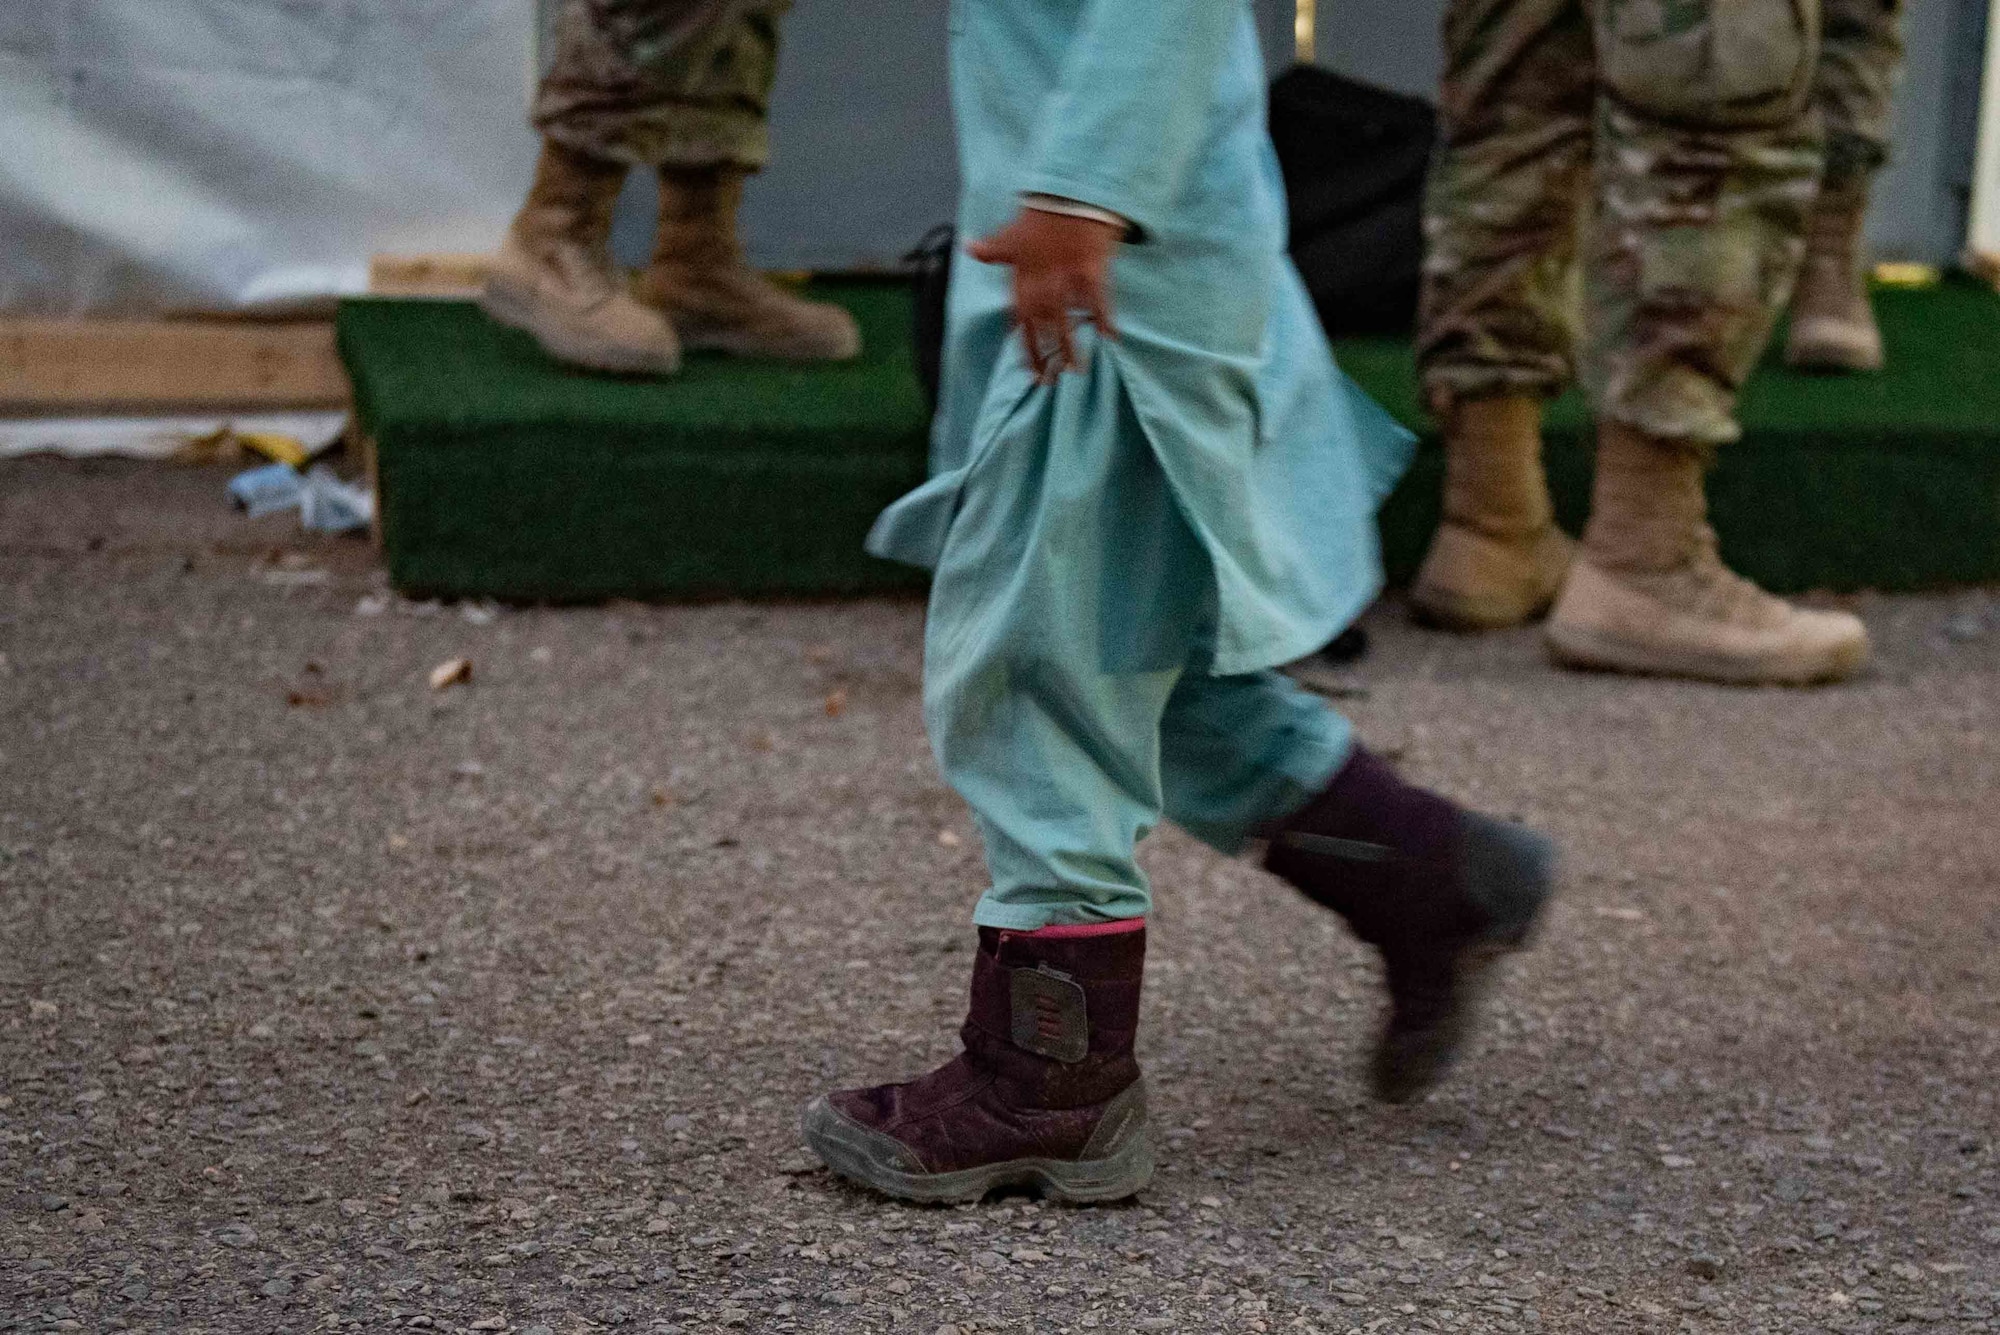 An Afghan child walks with his family to start the resettlement process on Holloman Air Force Base, New Mexico, Sept. 28, 2021. The Department of Defense, through U.S. Northern Command, and in support of the Department of State and Department of Homeland Security, is providing transportation, temporary housing, medical screening, and general support for at least 50,000 Afghan evacuees at suitable facilities, in permanent or temporary structures, as quickly as possible. This initiative provides Afghan evacuees essential support at secure locations outside Afghanistan. (U.S. Air Force photo by Staff Sgt. Kenneth Boyton)